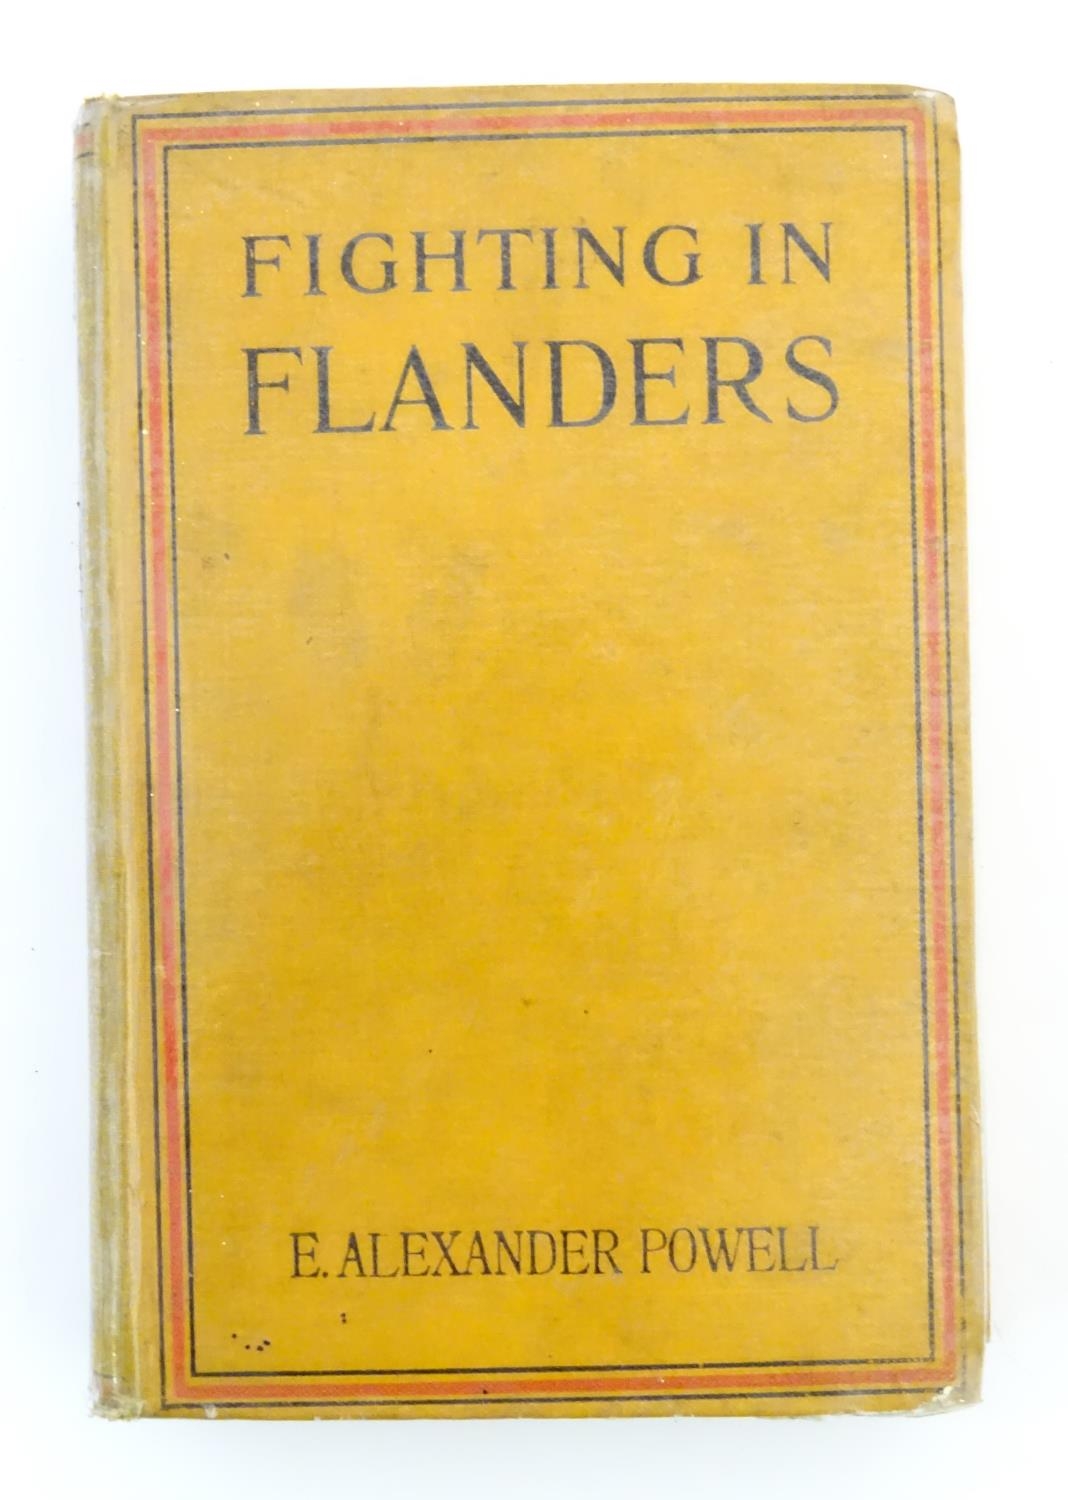 Book: Fighting in Flanders by E. Alexander Powell with illustrations from photographs by Donald - Image 3 of 6